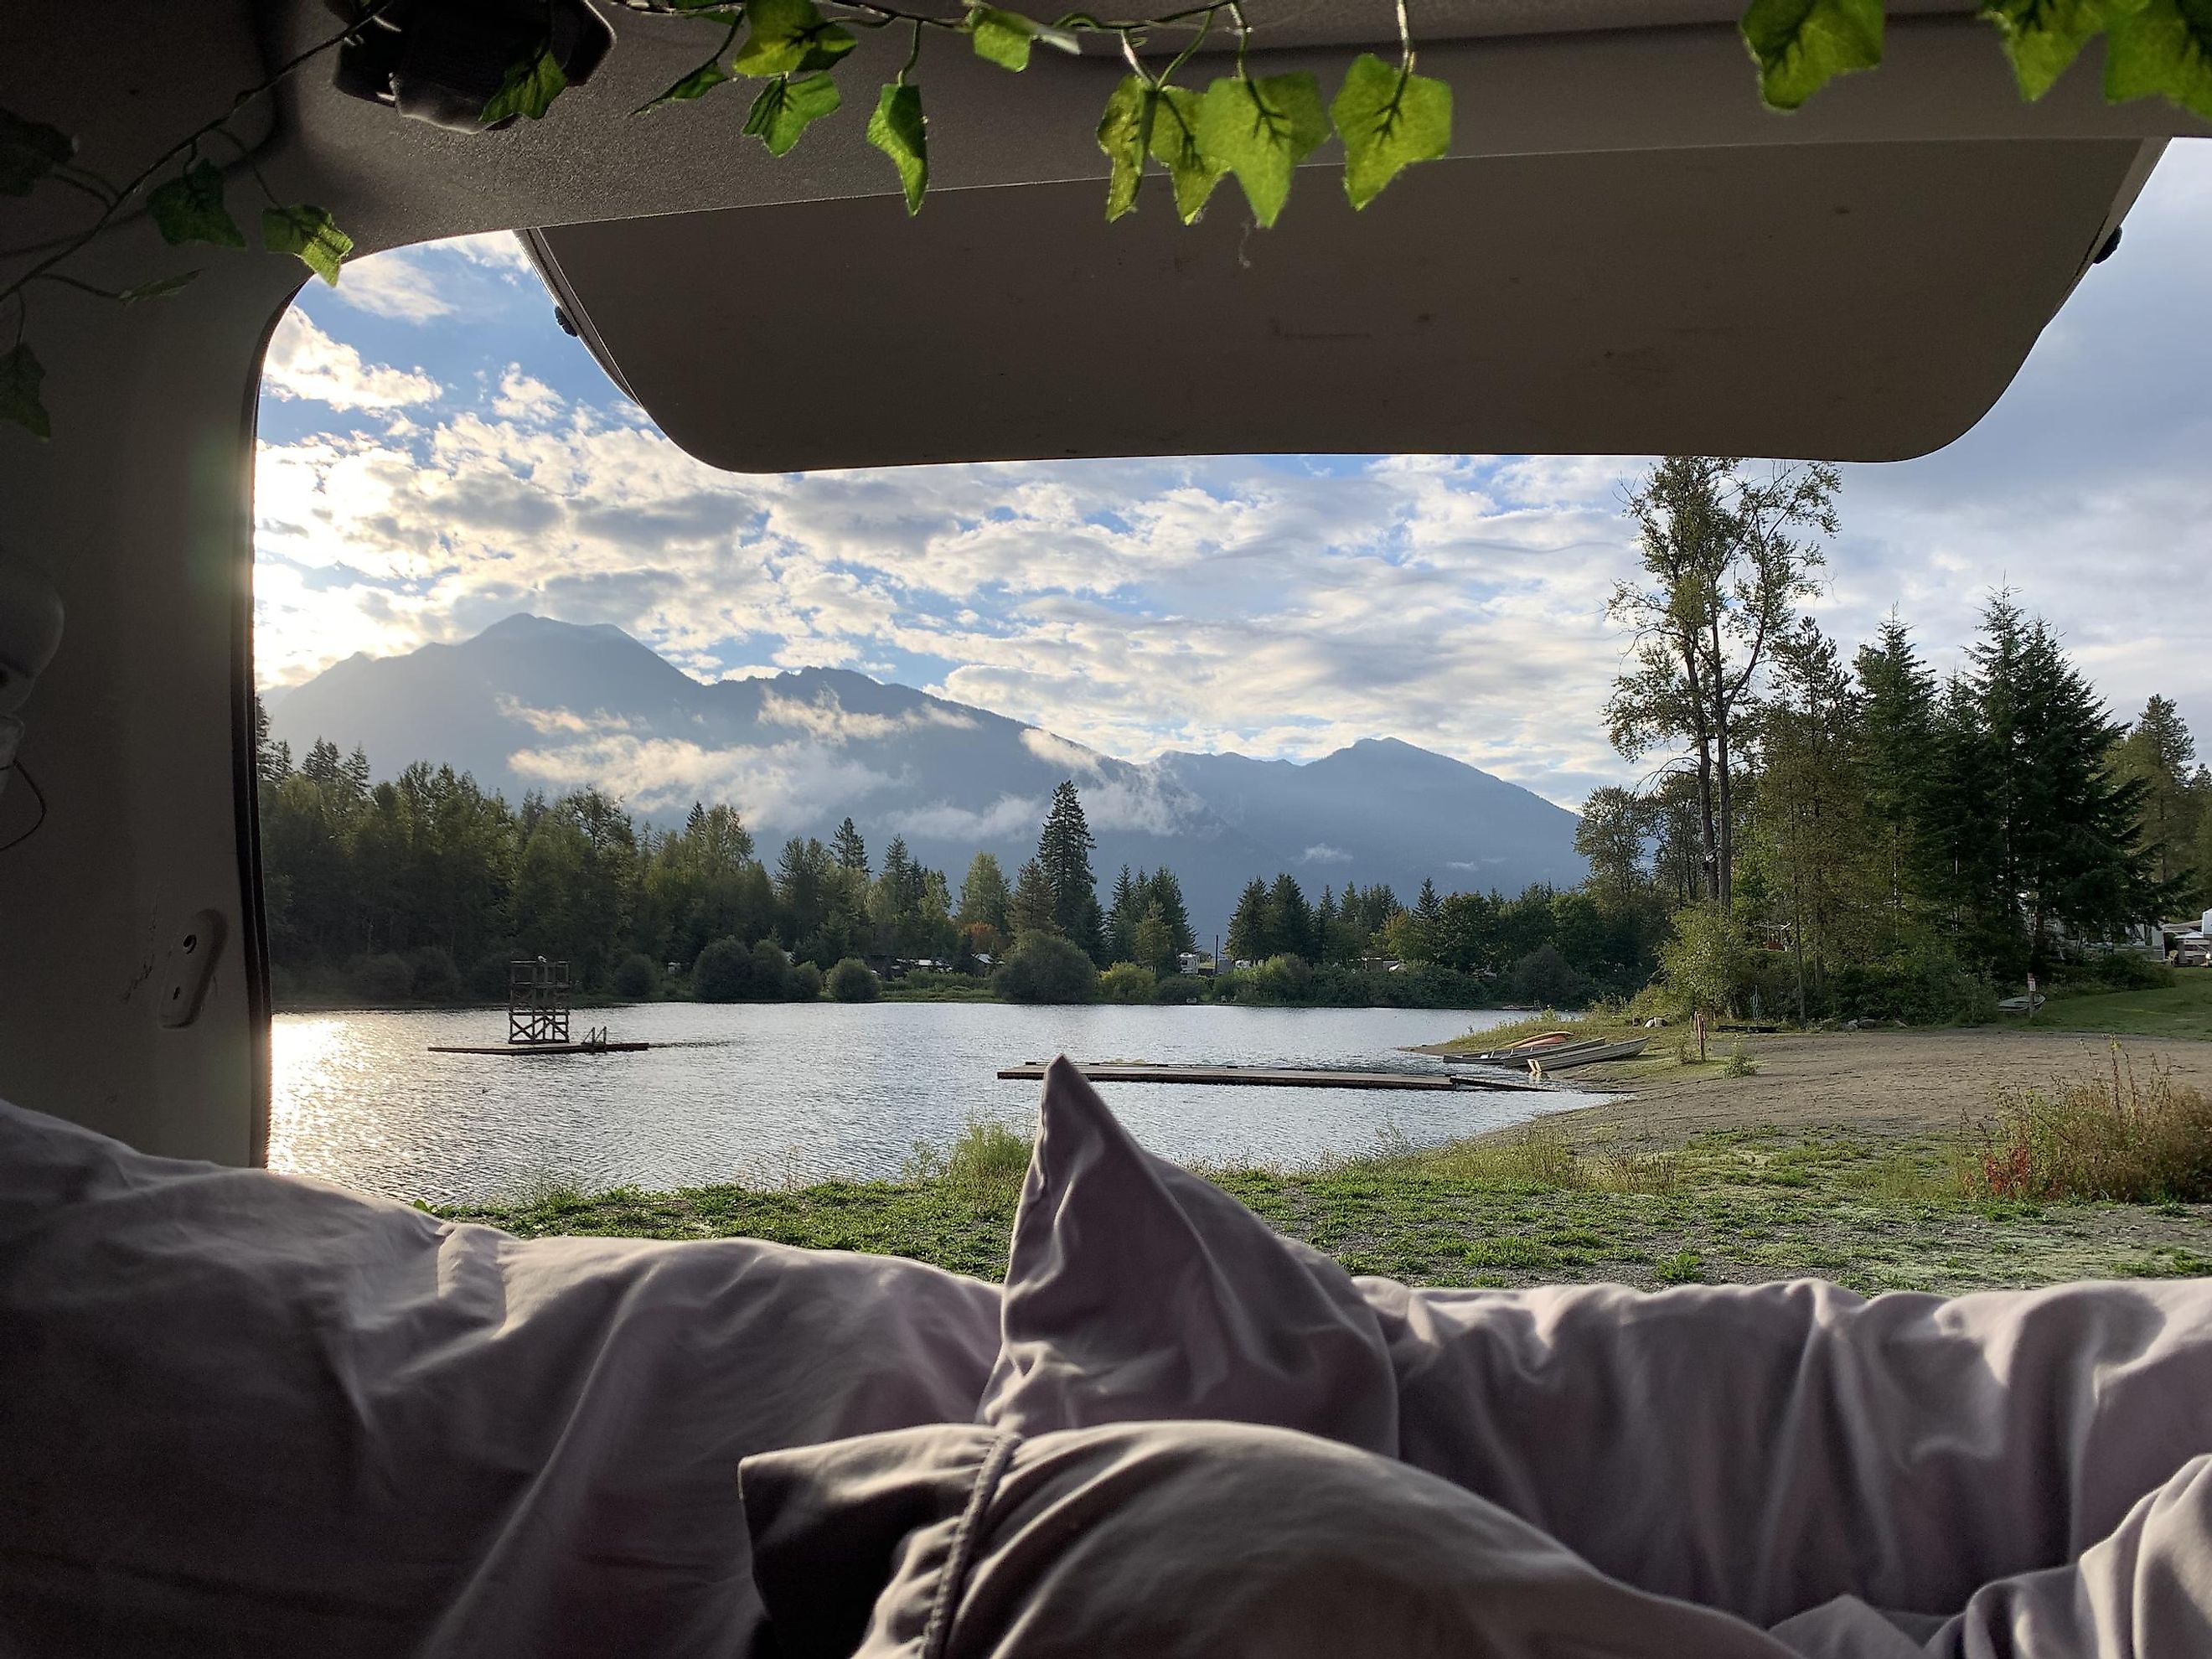 Looking out on Mirror Lake, BC, and the surrounding mountains, from the back of a van camping setup. Photo: Irina Lipan